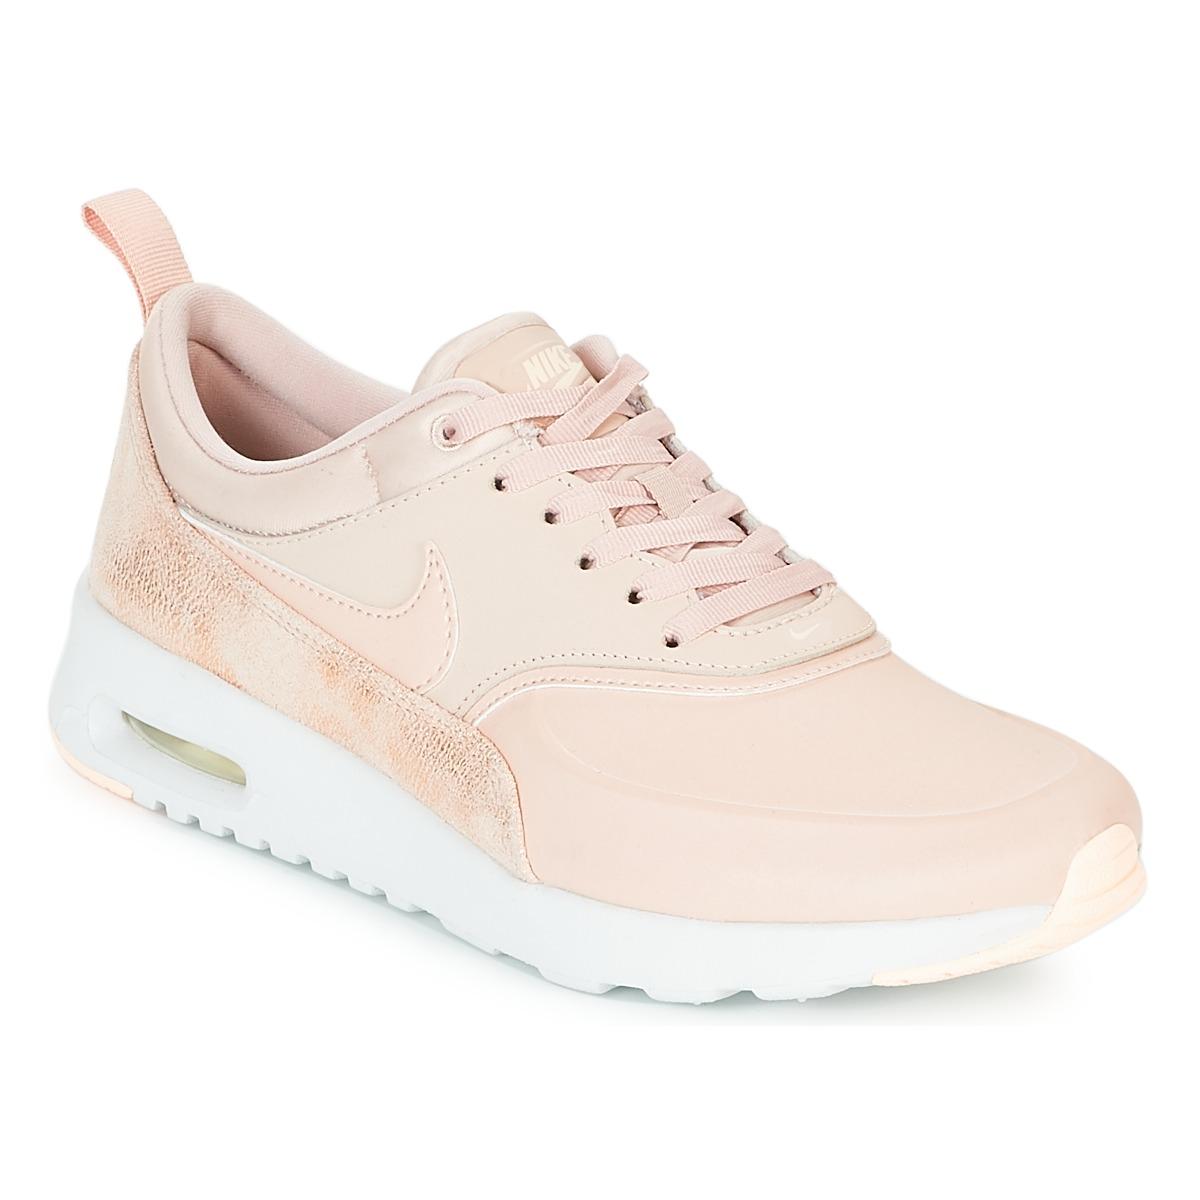 Nike Air Max Thea Premium W Women's Shoes (trainers) In Pink - Lyst